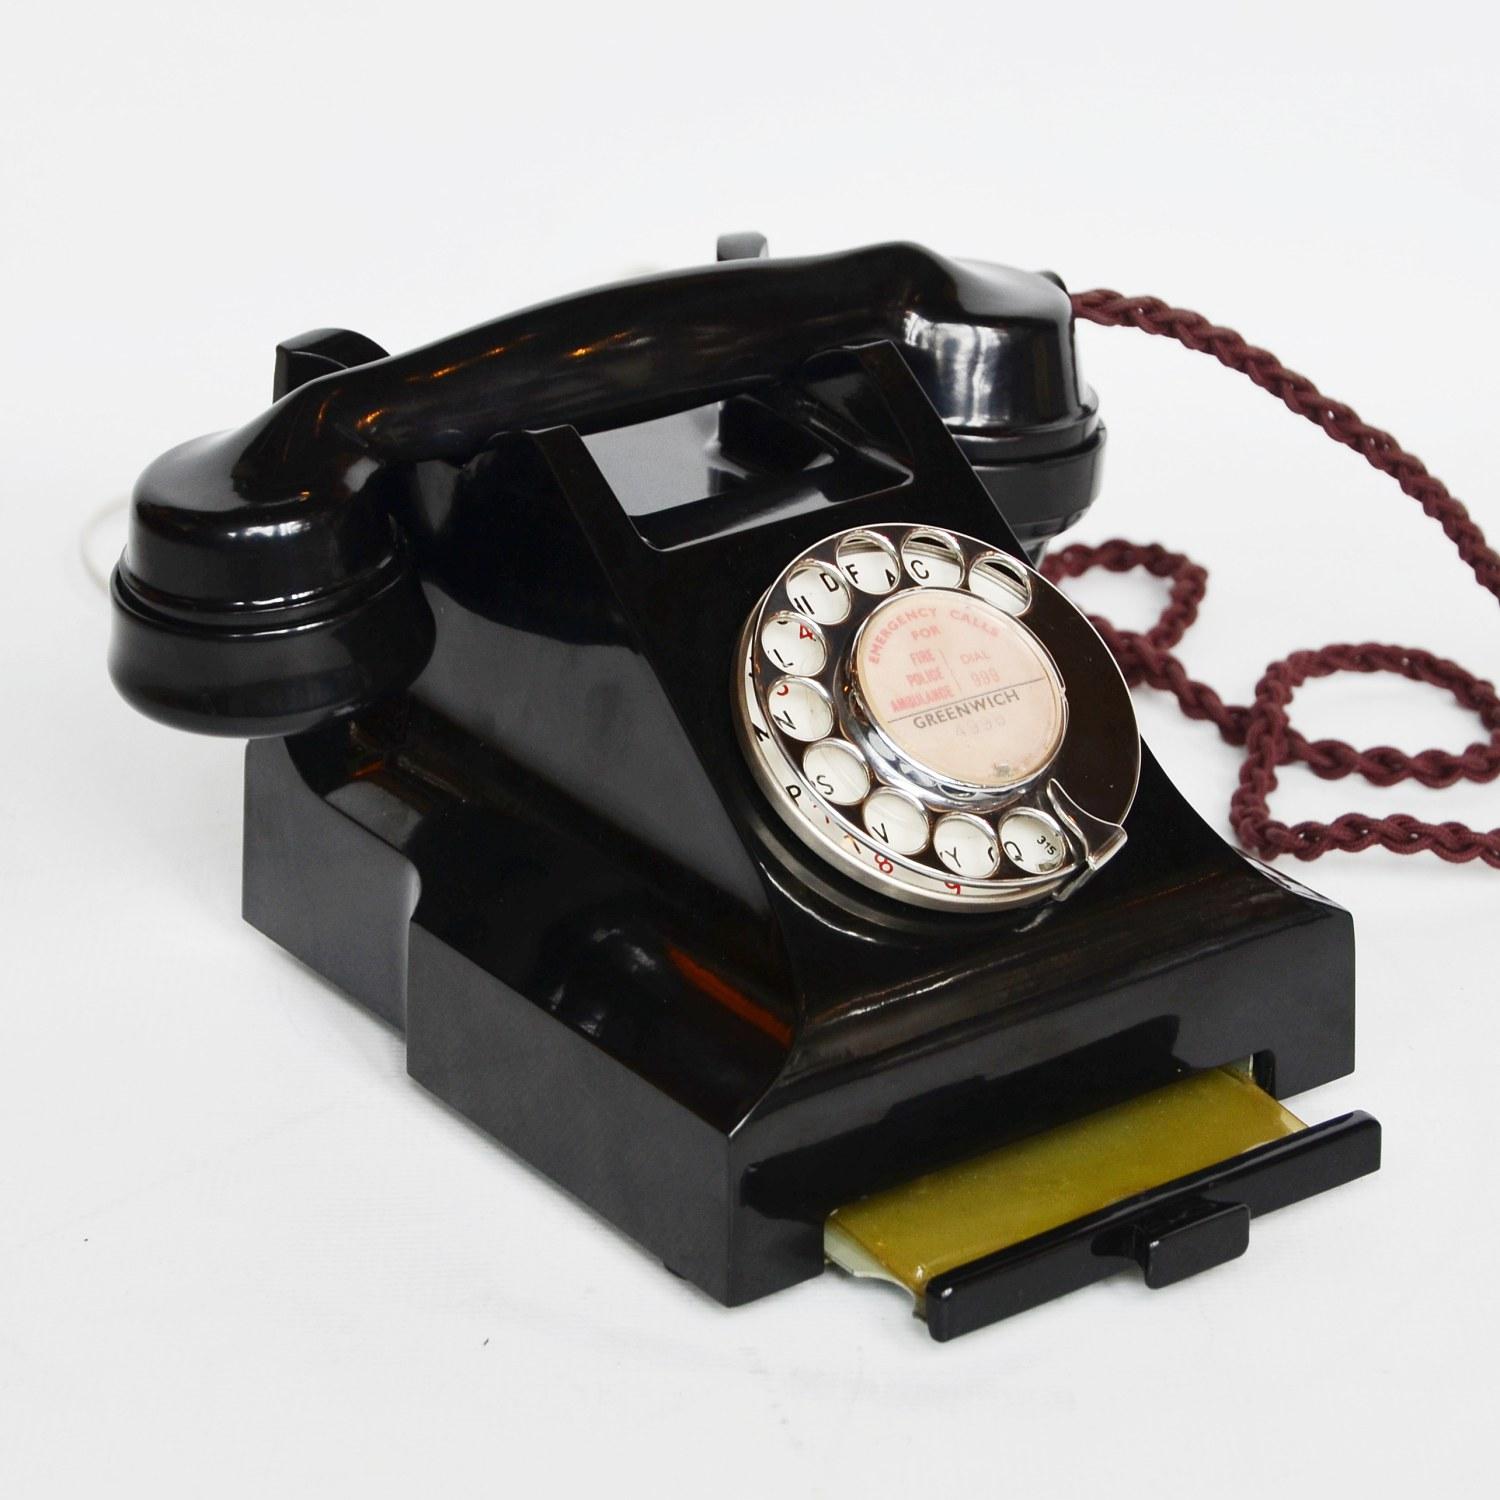 An original GPO model 312L telephone. Black bakelite with integral drawer and braided handset cord. Registered number to face. Call exchange feature.

Dimensions: H 15cm, W 20cm, D 16cm

Origin: English

Date: 1952

Item No: 110209

All of